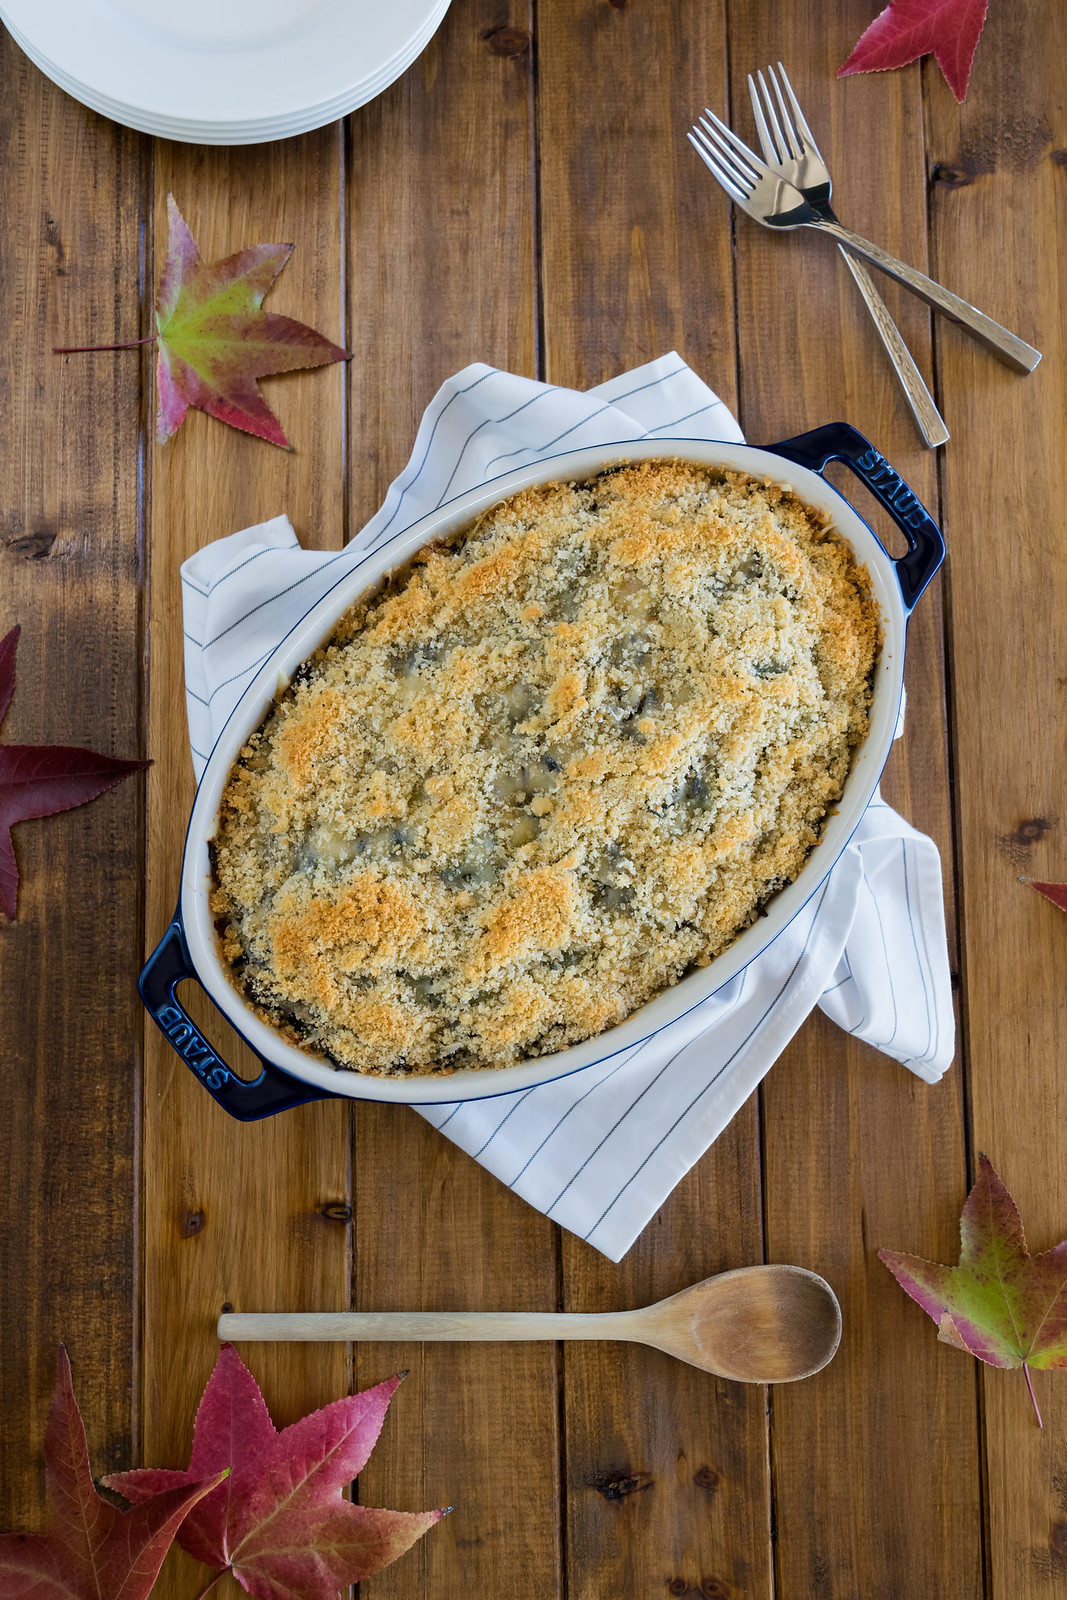 wild rice gratin with kale, caramelized onions, and emmentaler